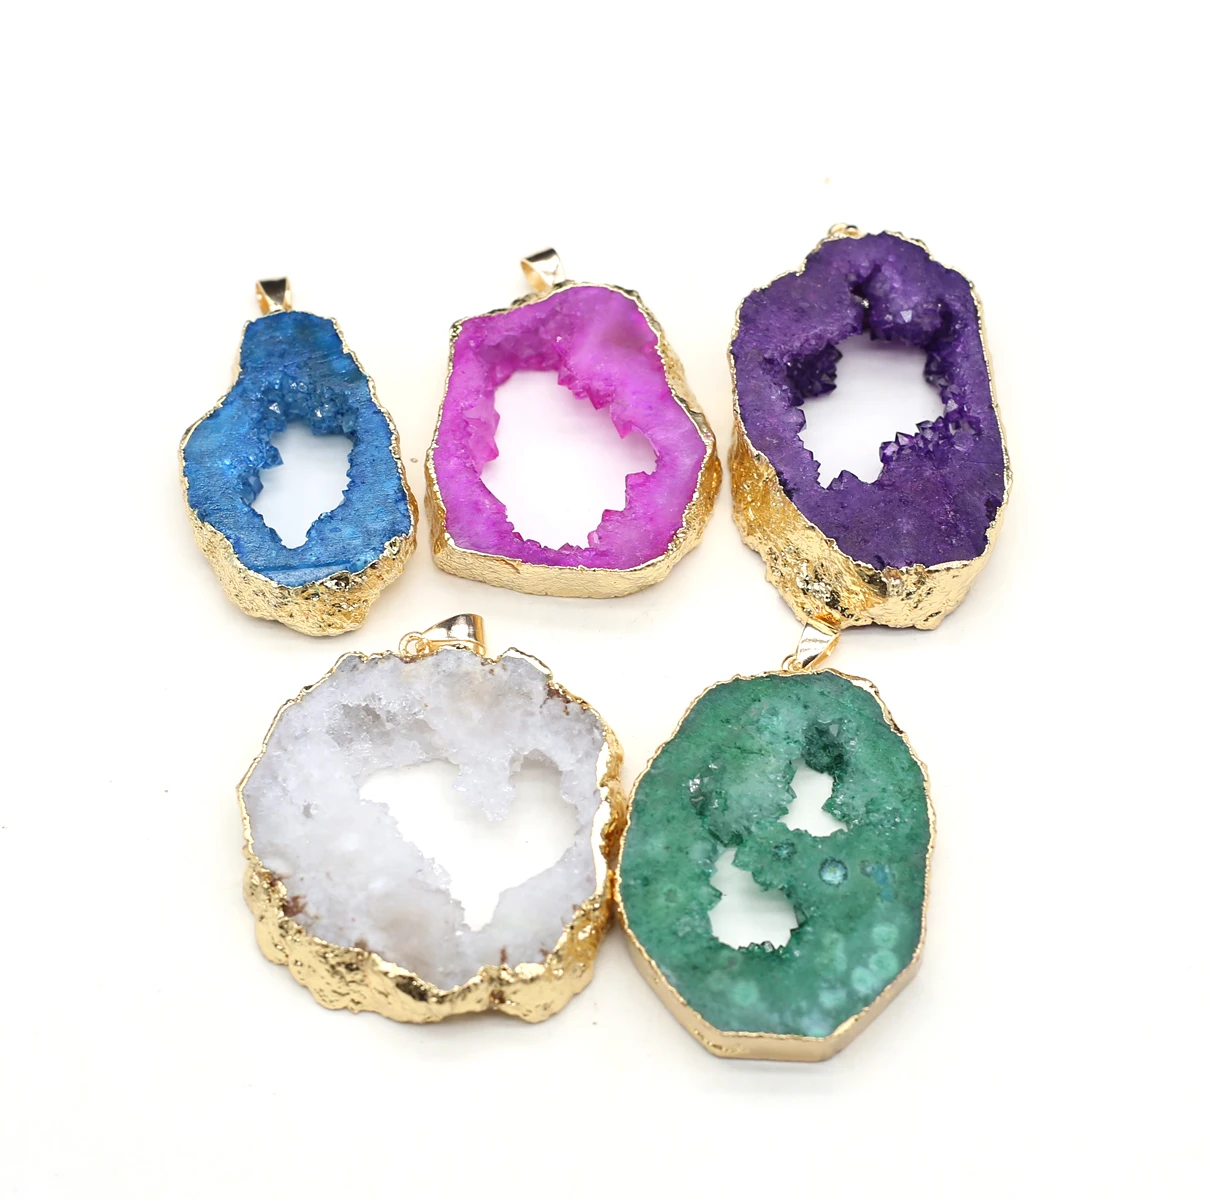 

Natural Colorful Rough Stone Crystal Druzy Agates Geode Pendant Irregular Gilt Quartz Gem Charms for Jewelry Making DIY Necklace